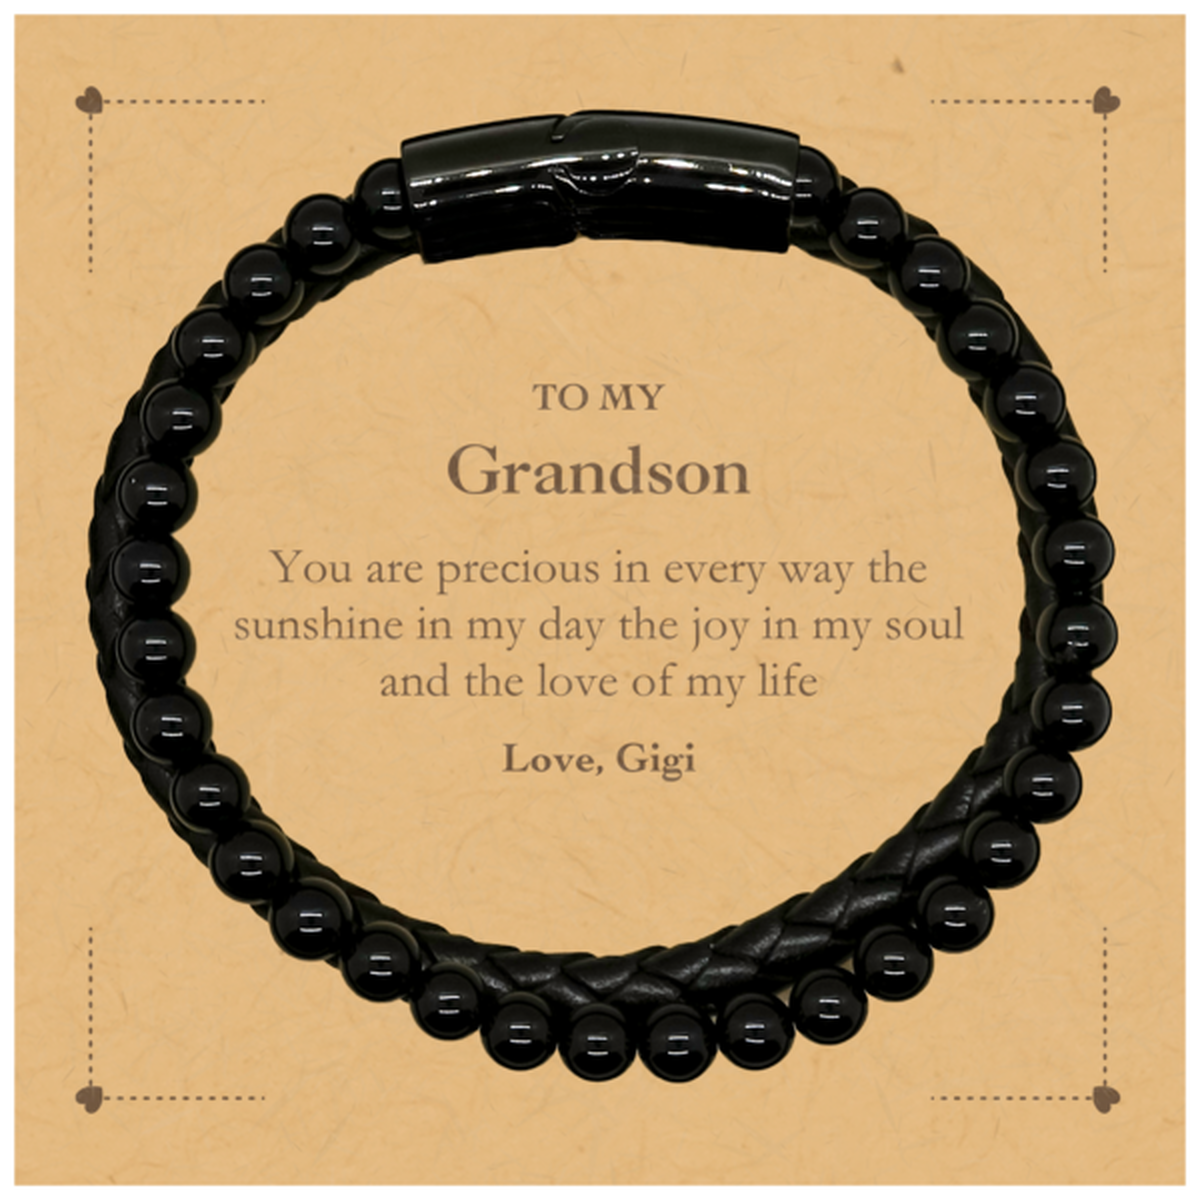 Graduation Gifts for Grandson Stone Leather Bracelets Present from Gigi, Christmas Grandson Birthday Gifts Grandson You are precious in every way the sunshine in my day. Love, Gigi